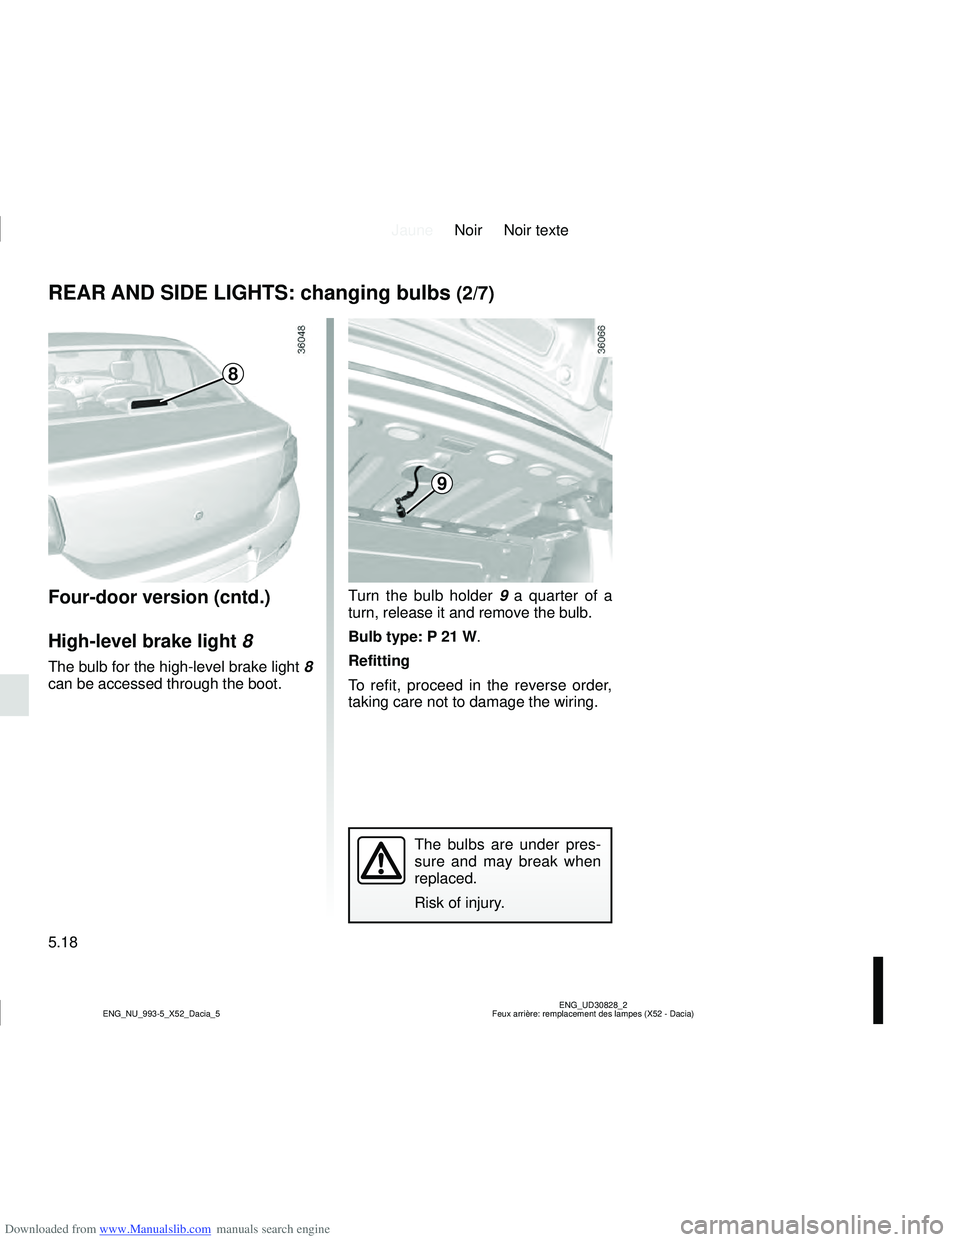 DACIA LOGAN 2015  Owners Manual Downloaded from www.Manualslib.com manuals search engine JauneNoir Noir texte
5.18
ENG_UD30828_2
Feux arrière: remplacement des lampes (X52 - Dacia)
ENG_NU_993-5_X52_Dacia_5
REAR AND SIDE LIGHTS: cha